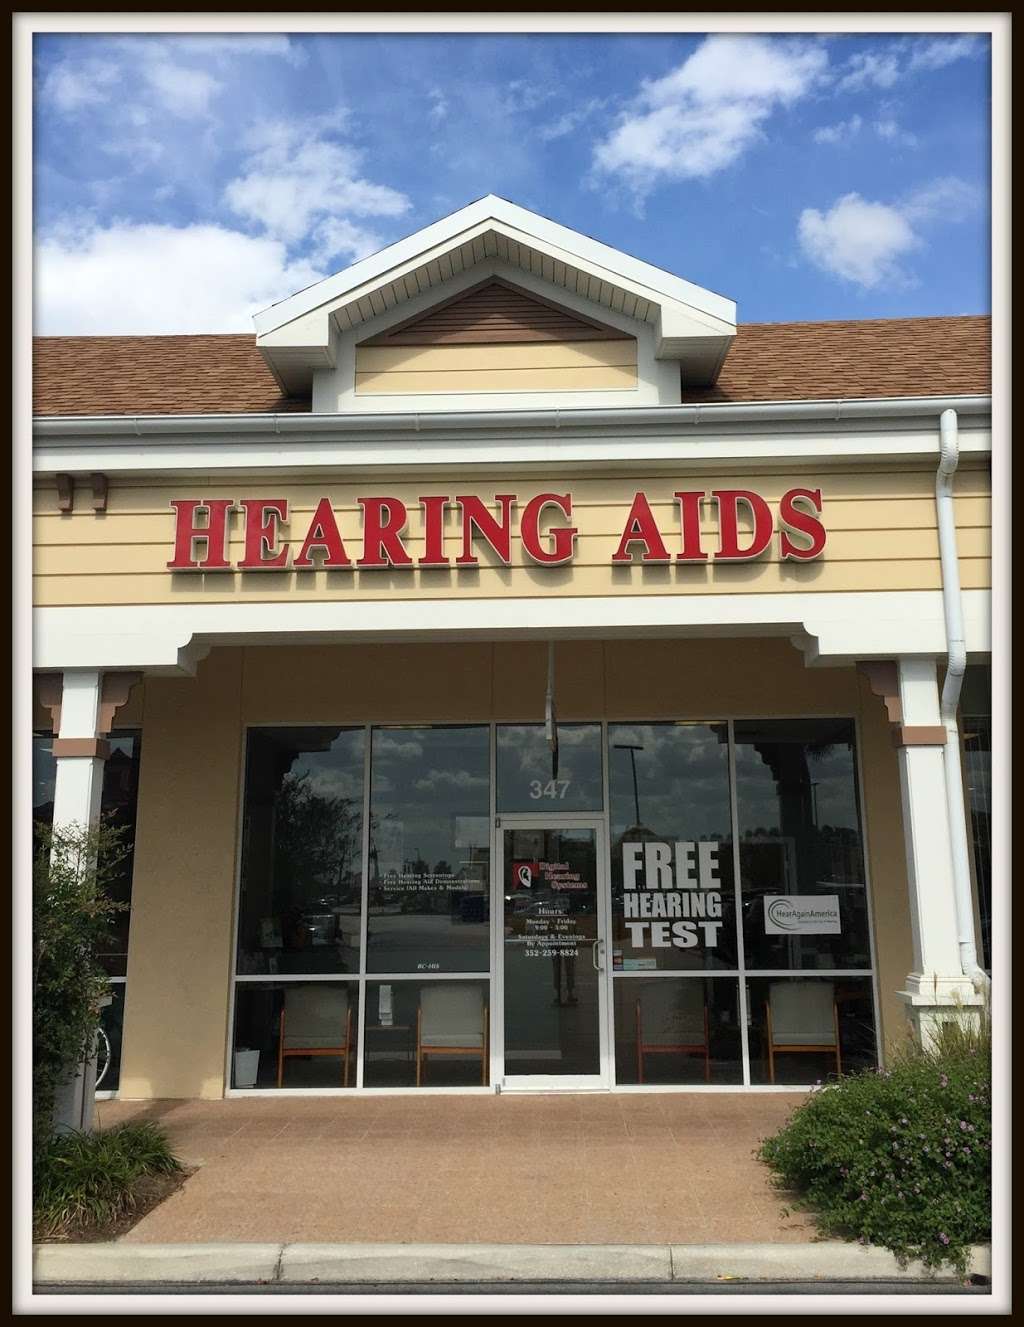 Digital Hearing Systems/ A Division of Hear Again America | 347 Colony Blvd, The Villages, FL 32162, USA | Phone: (352) 259-8824